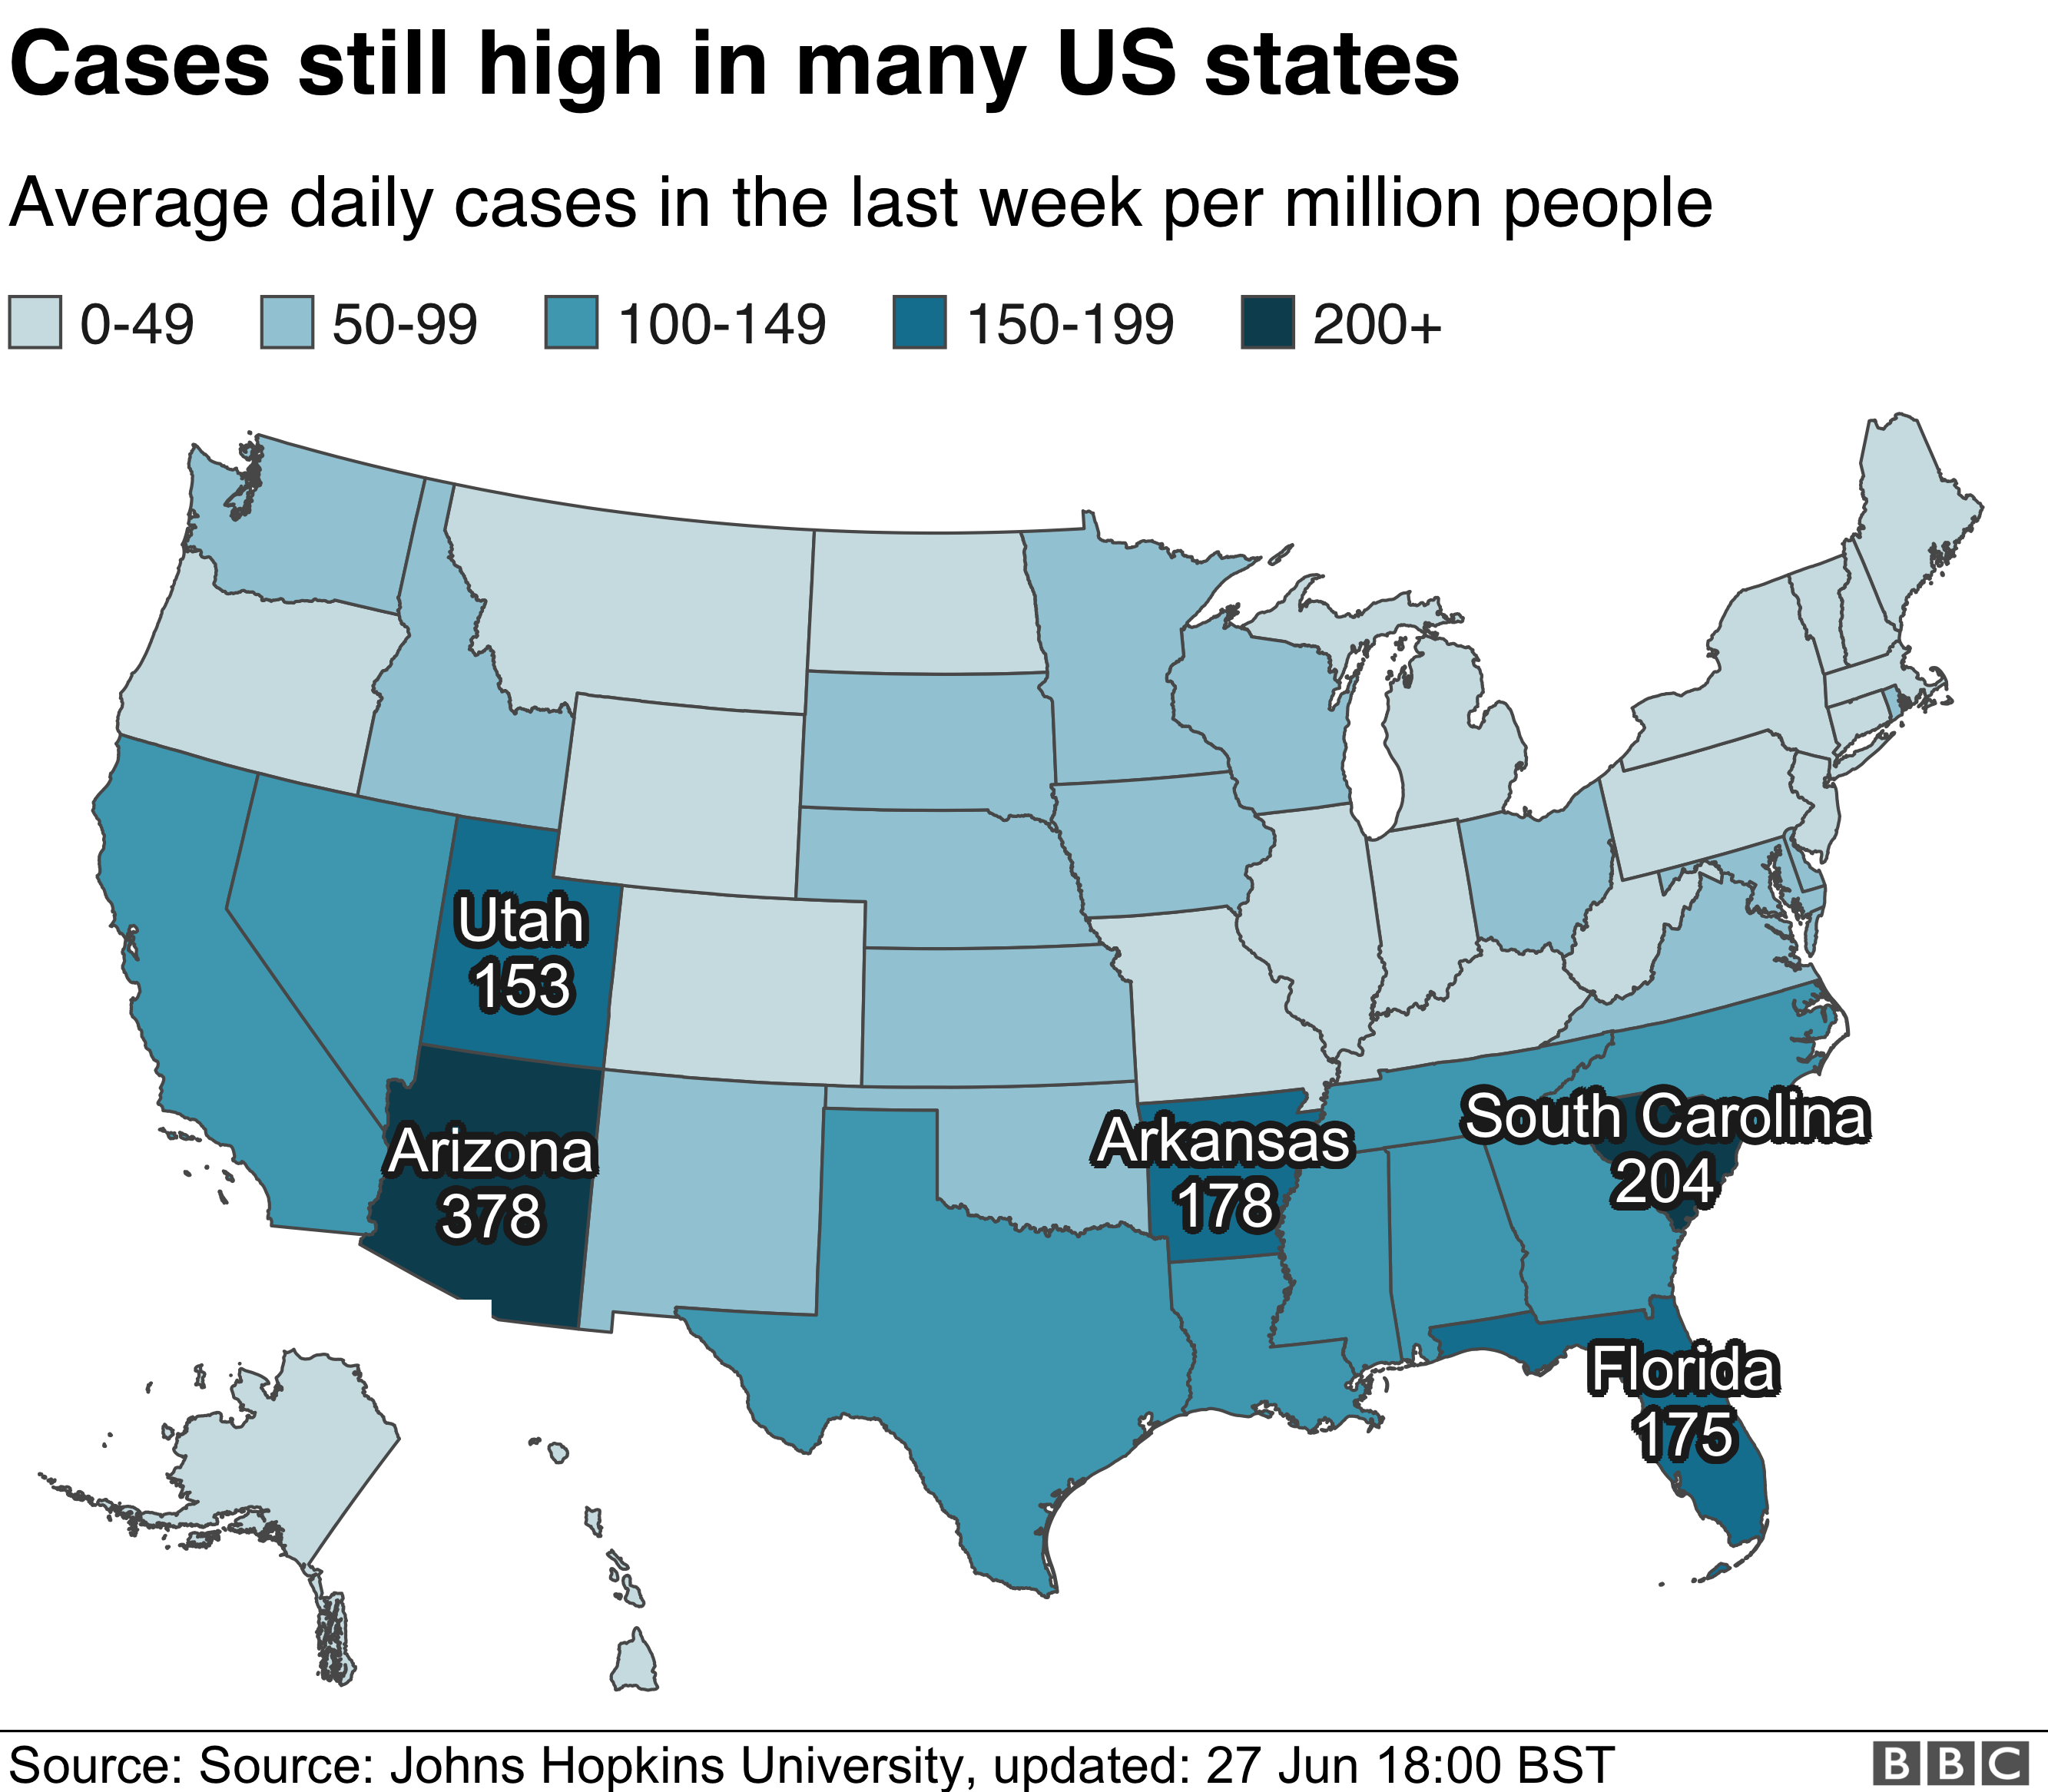 Map showing average daily cases in the US